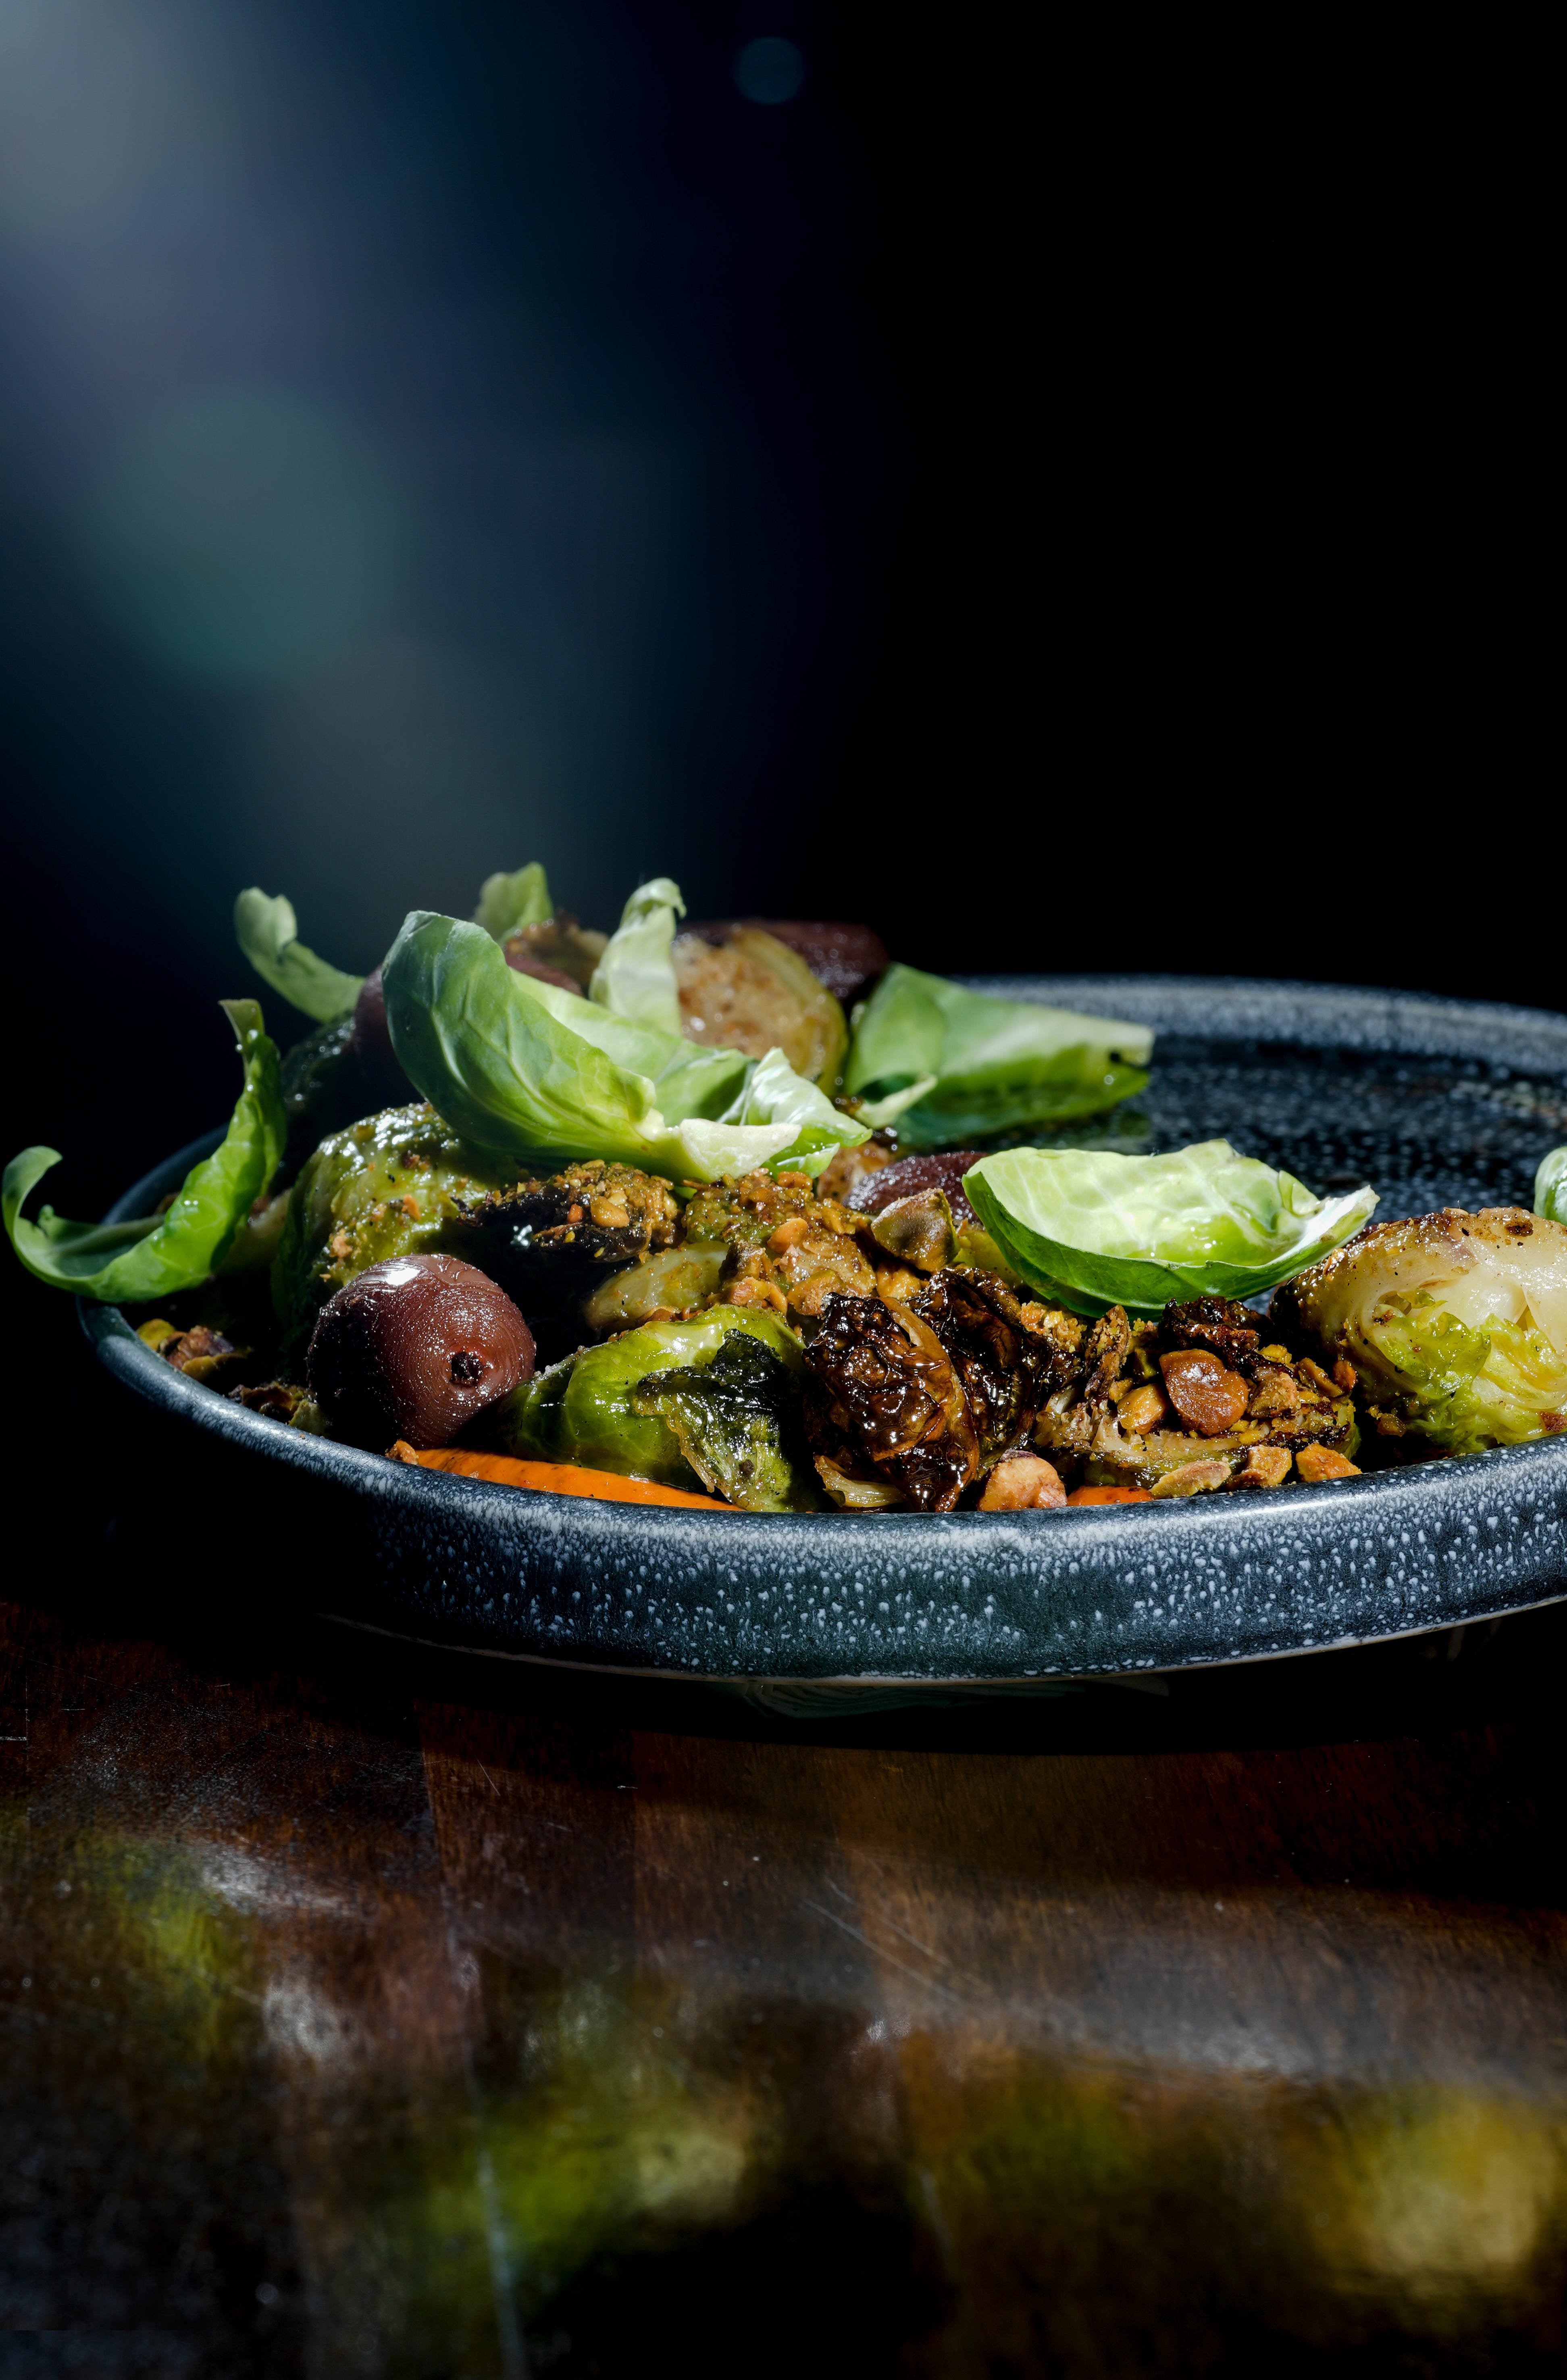 Wood-fired brussels sprouts with ras el hanout, pistachio, muhammara and balsamic roasted grapes is an autumn dish at Odd Duck in Walker's Point.